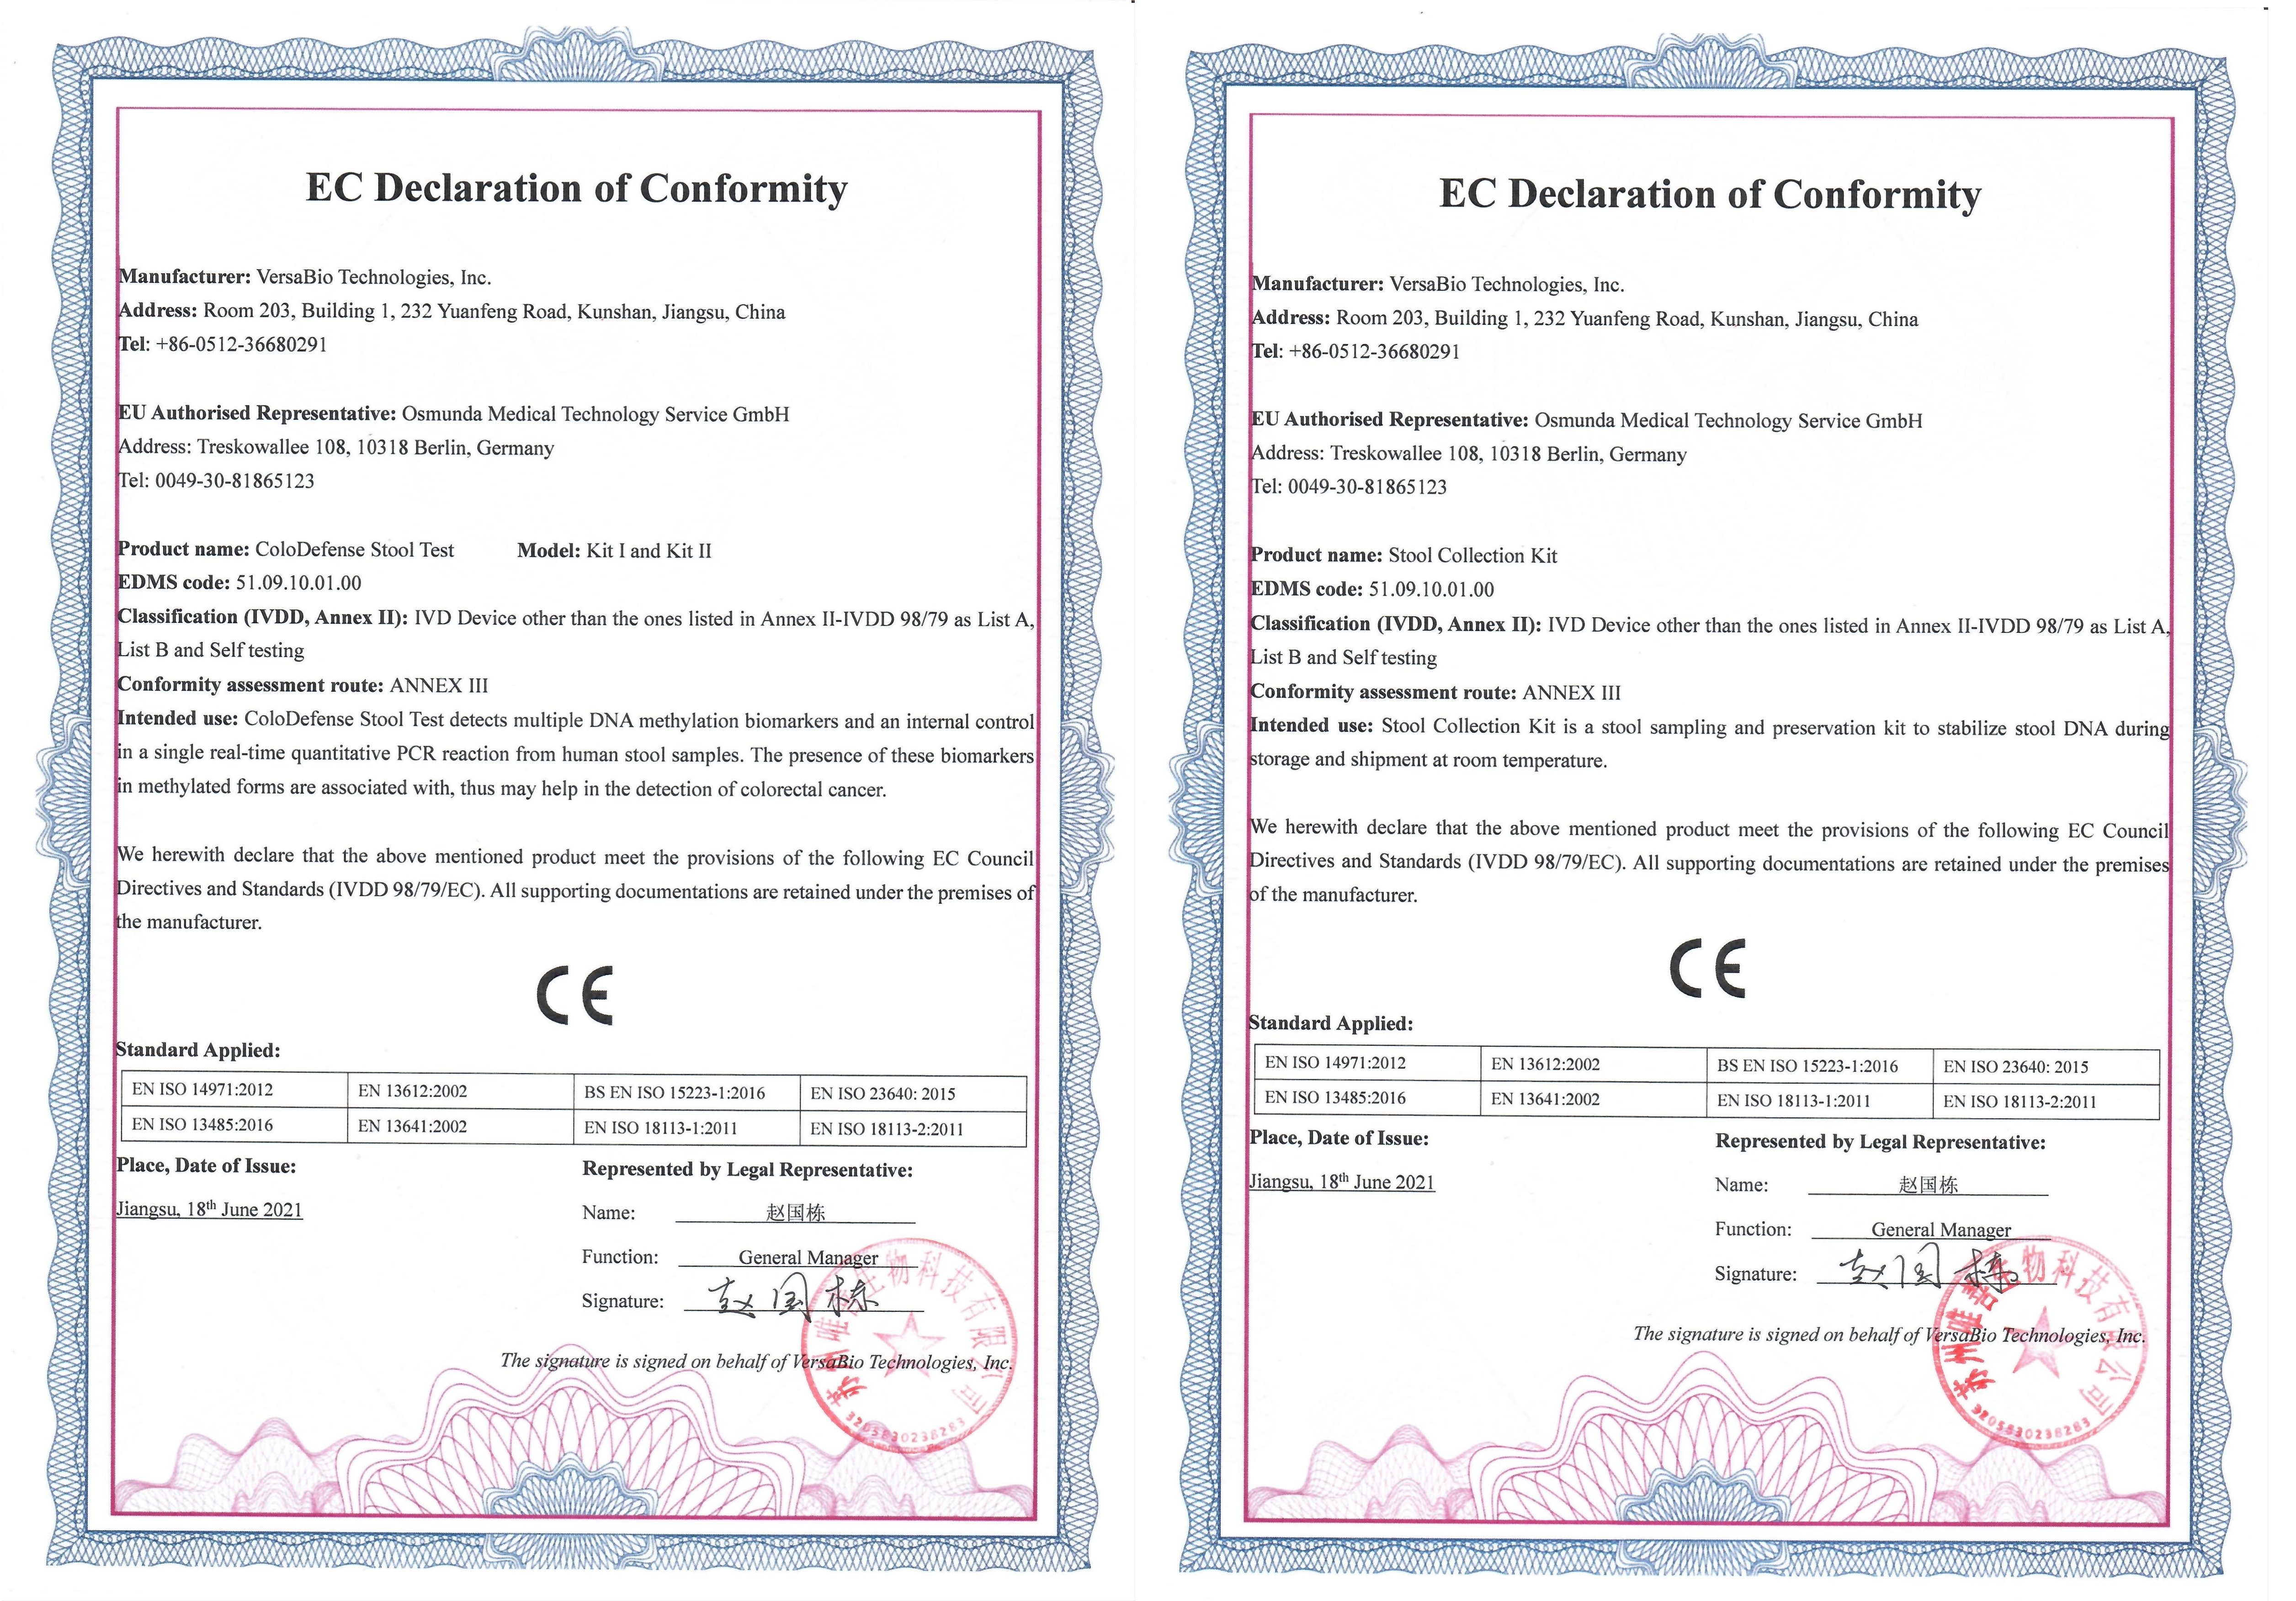 Heavy! Weishan Bio-intestinal cancer fecal DNA early detection product Changbeishan obtained EU CE certification